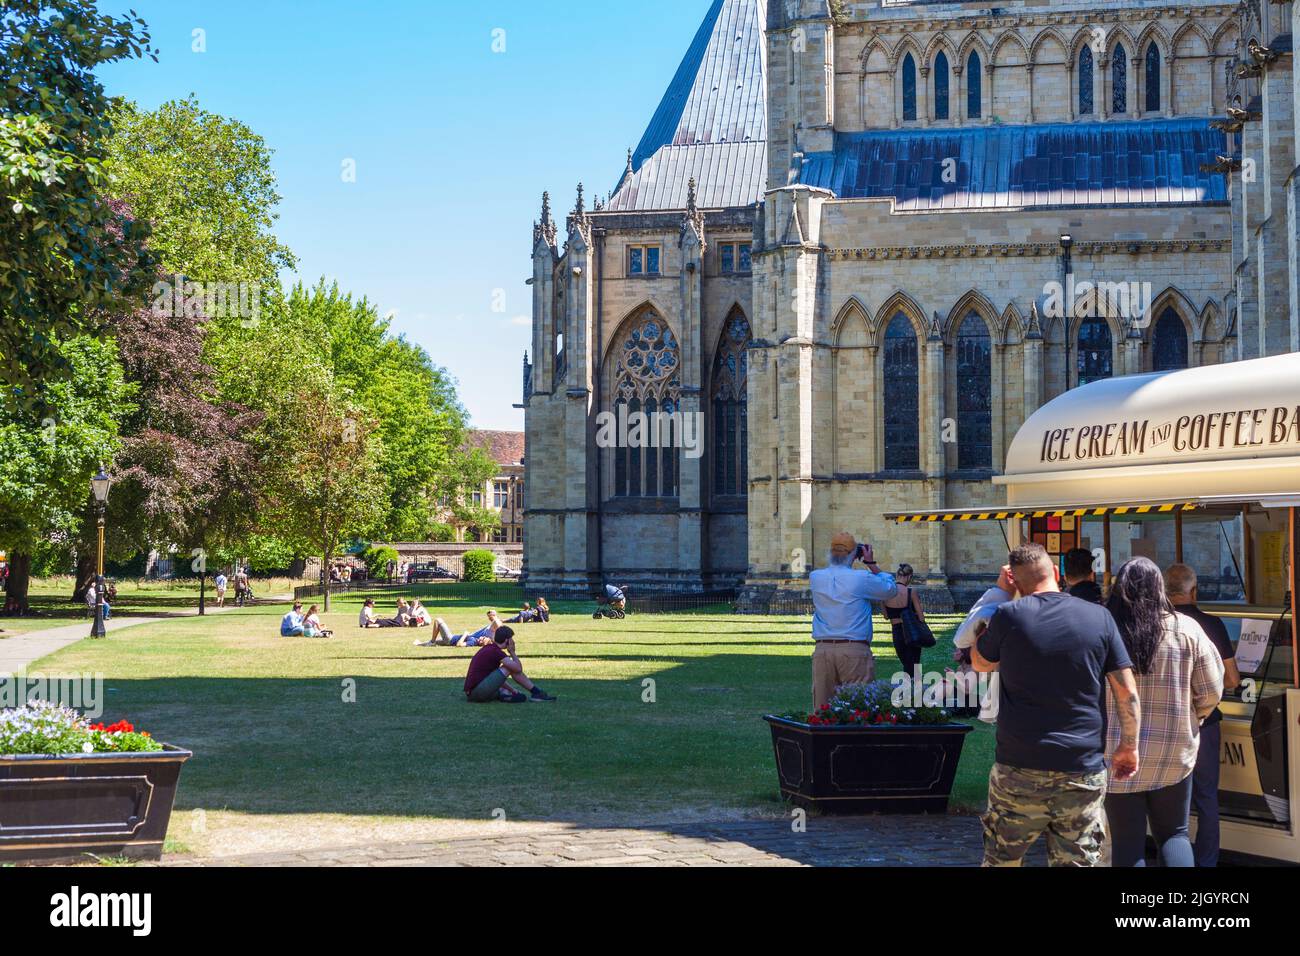 Dean's Park in York,North Yorkshire,England,UK with Ice Cream and coffee bar in foreground Stock Photo